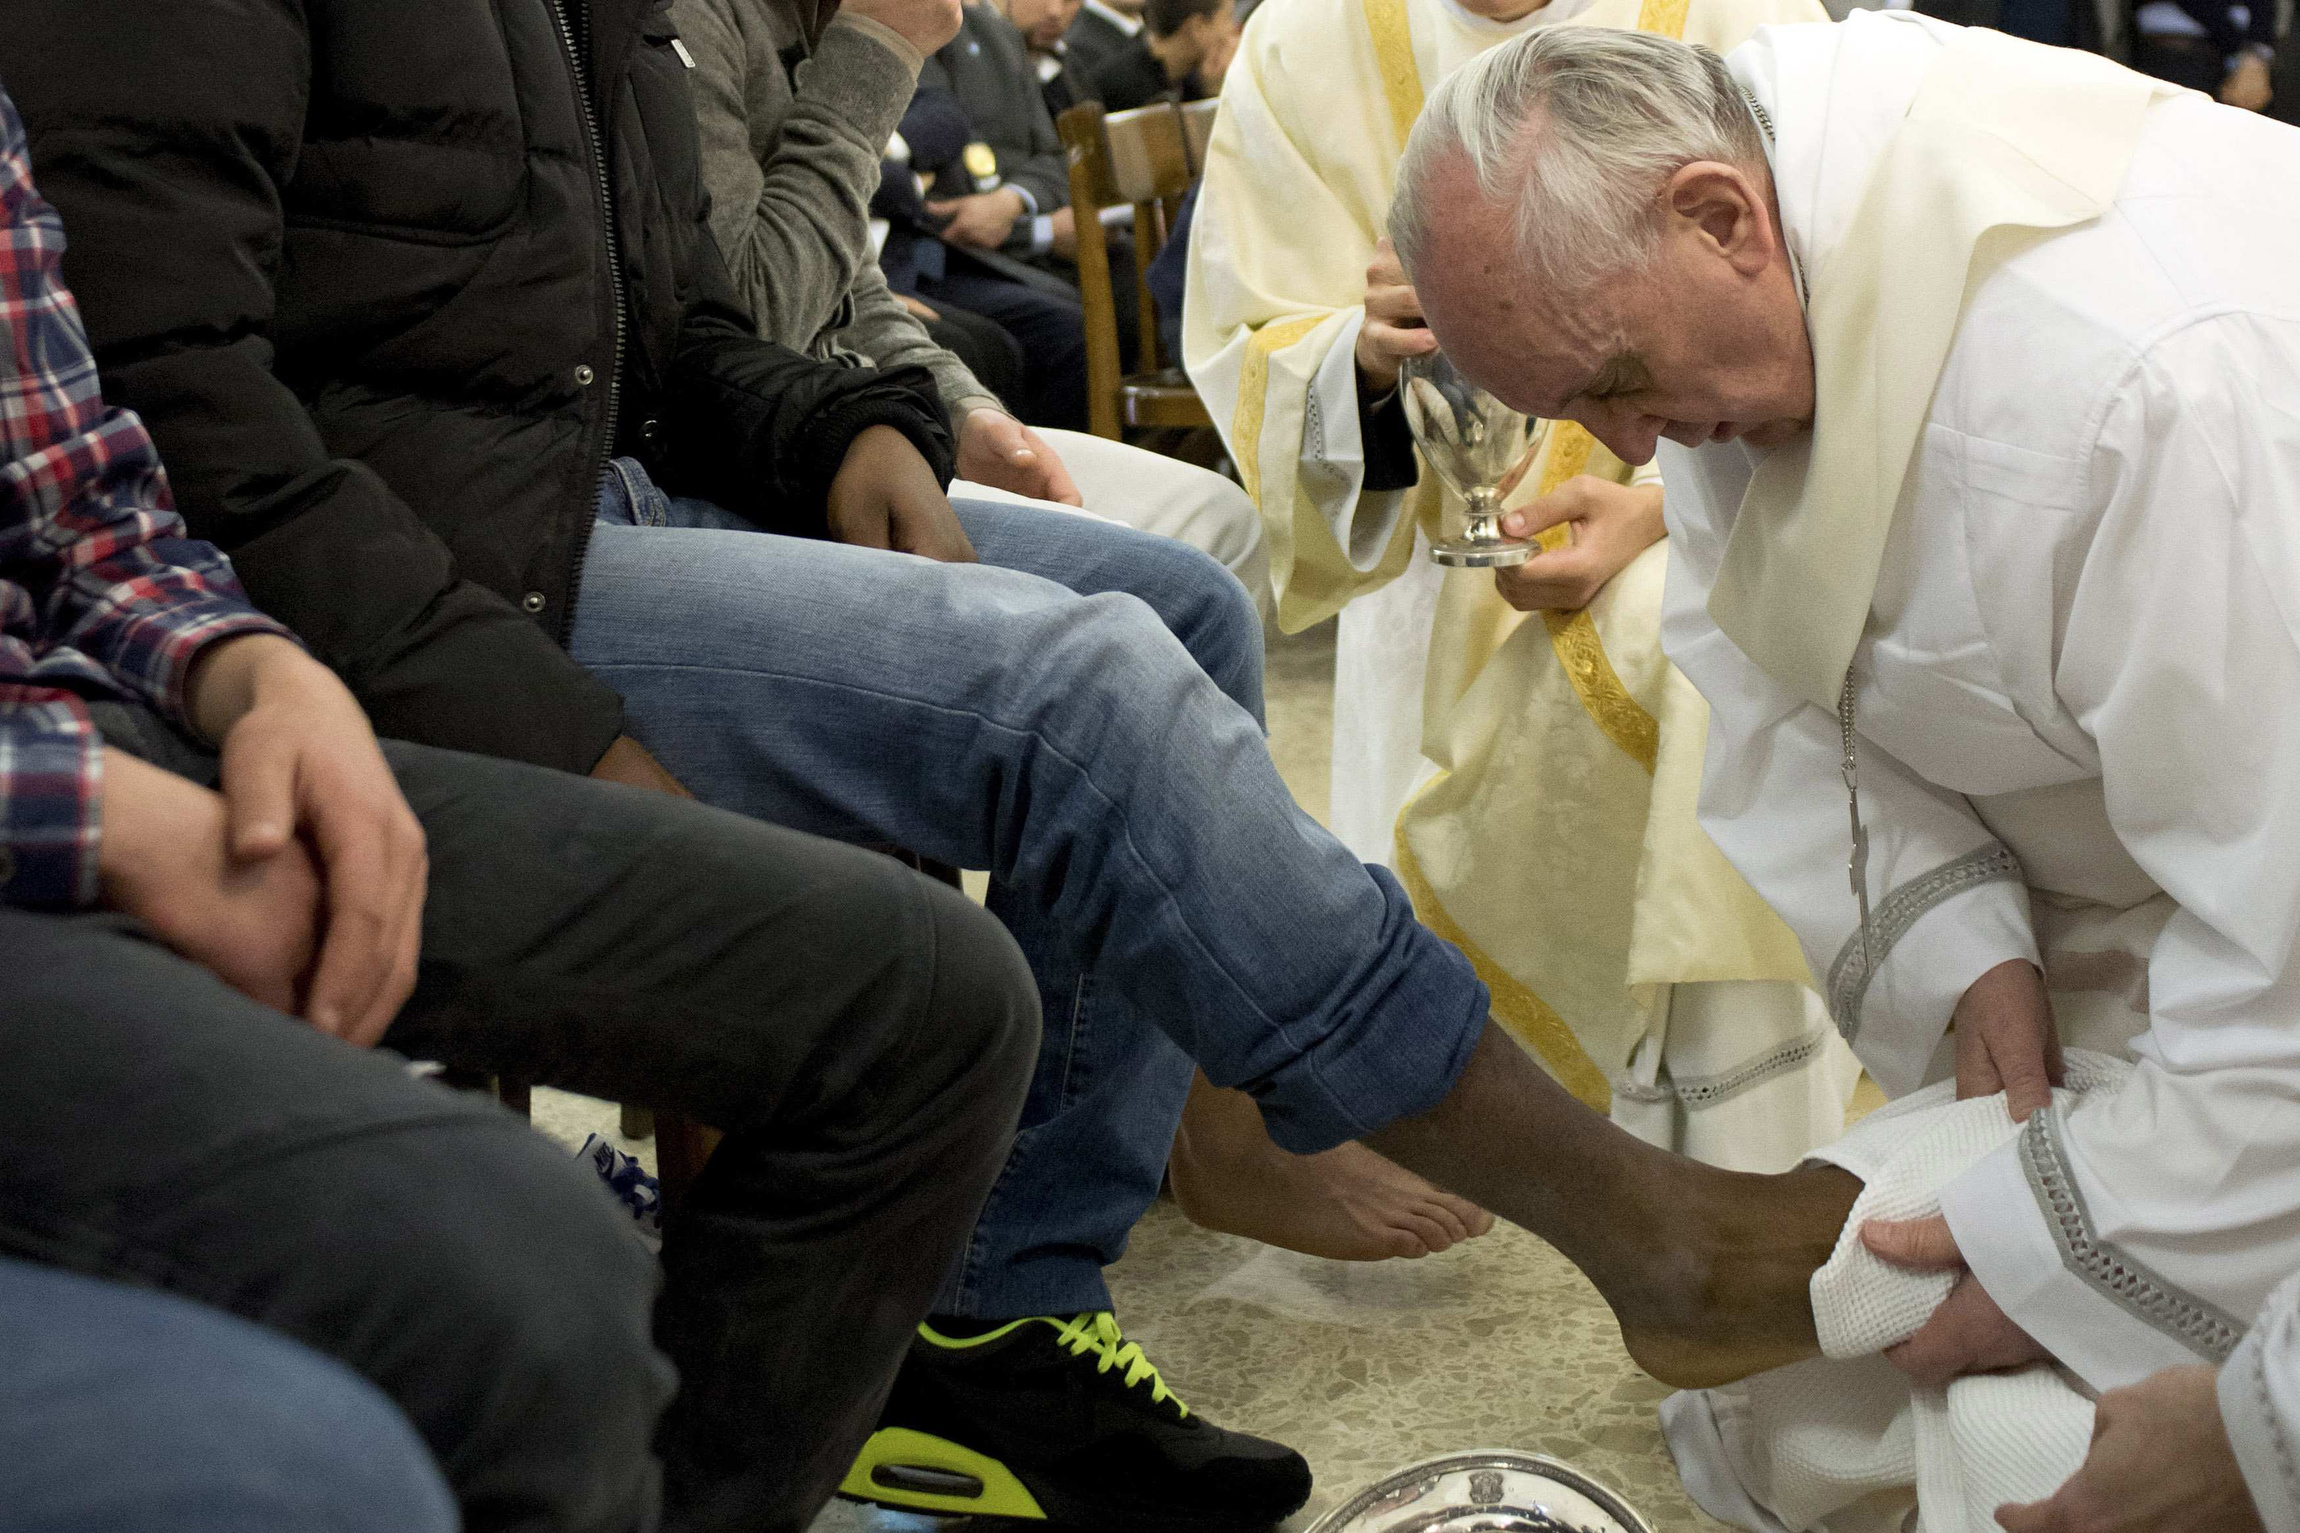 Pope Francis washes the foot of a prison inmate during the Holy Thursday Mass of the Lord's Supper at Rome's Casal del Marmo prison for minors March 28. Francis washed the feet of 12 young people of different nationalities and faiths, including at least two Muslims and two women, who are housed at the juvenile detention facility. (CNS photo/L'Osservatore Romano via Reuters)